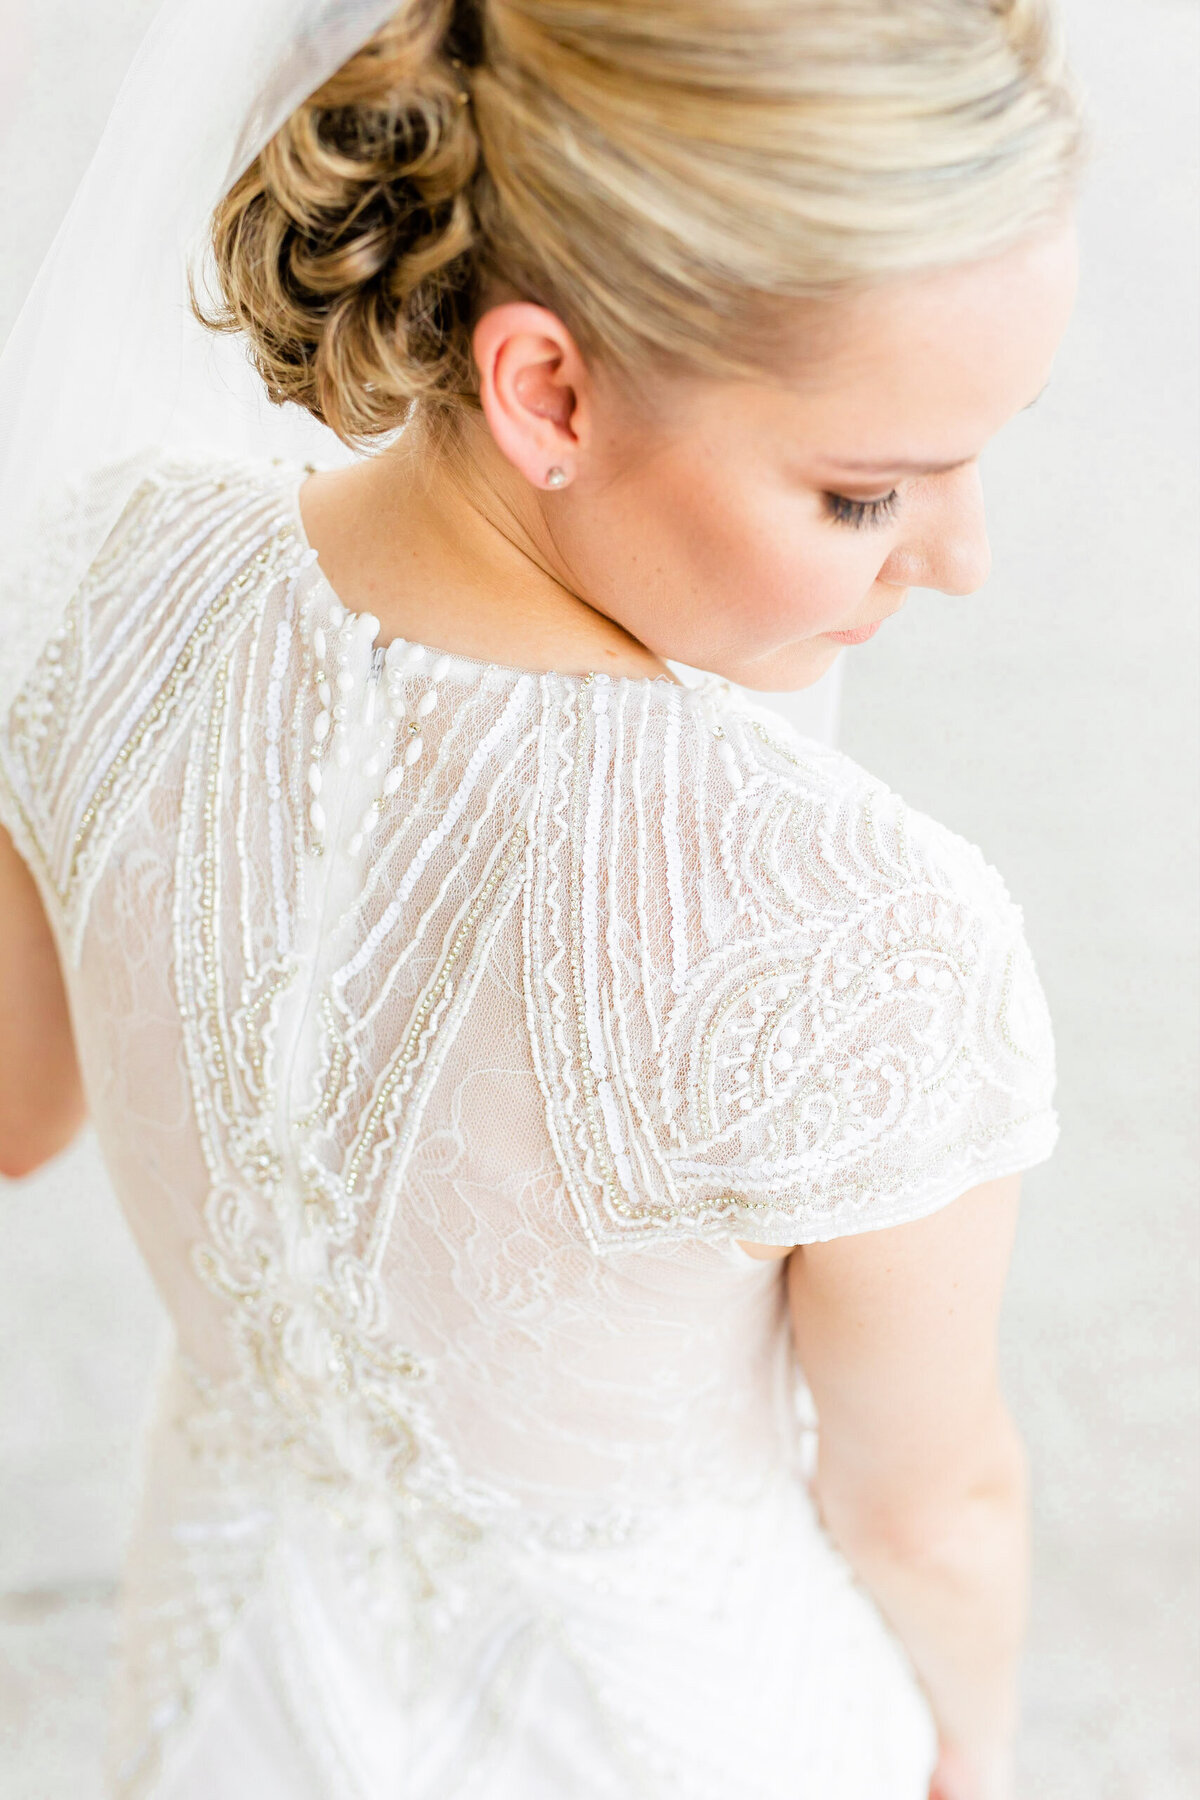 Light and Airy Luxury Bride